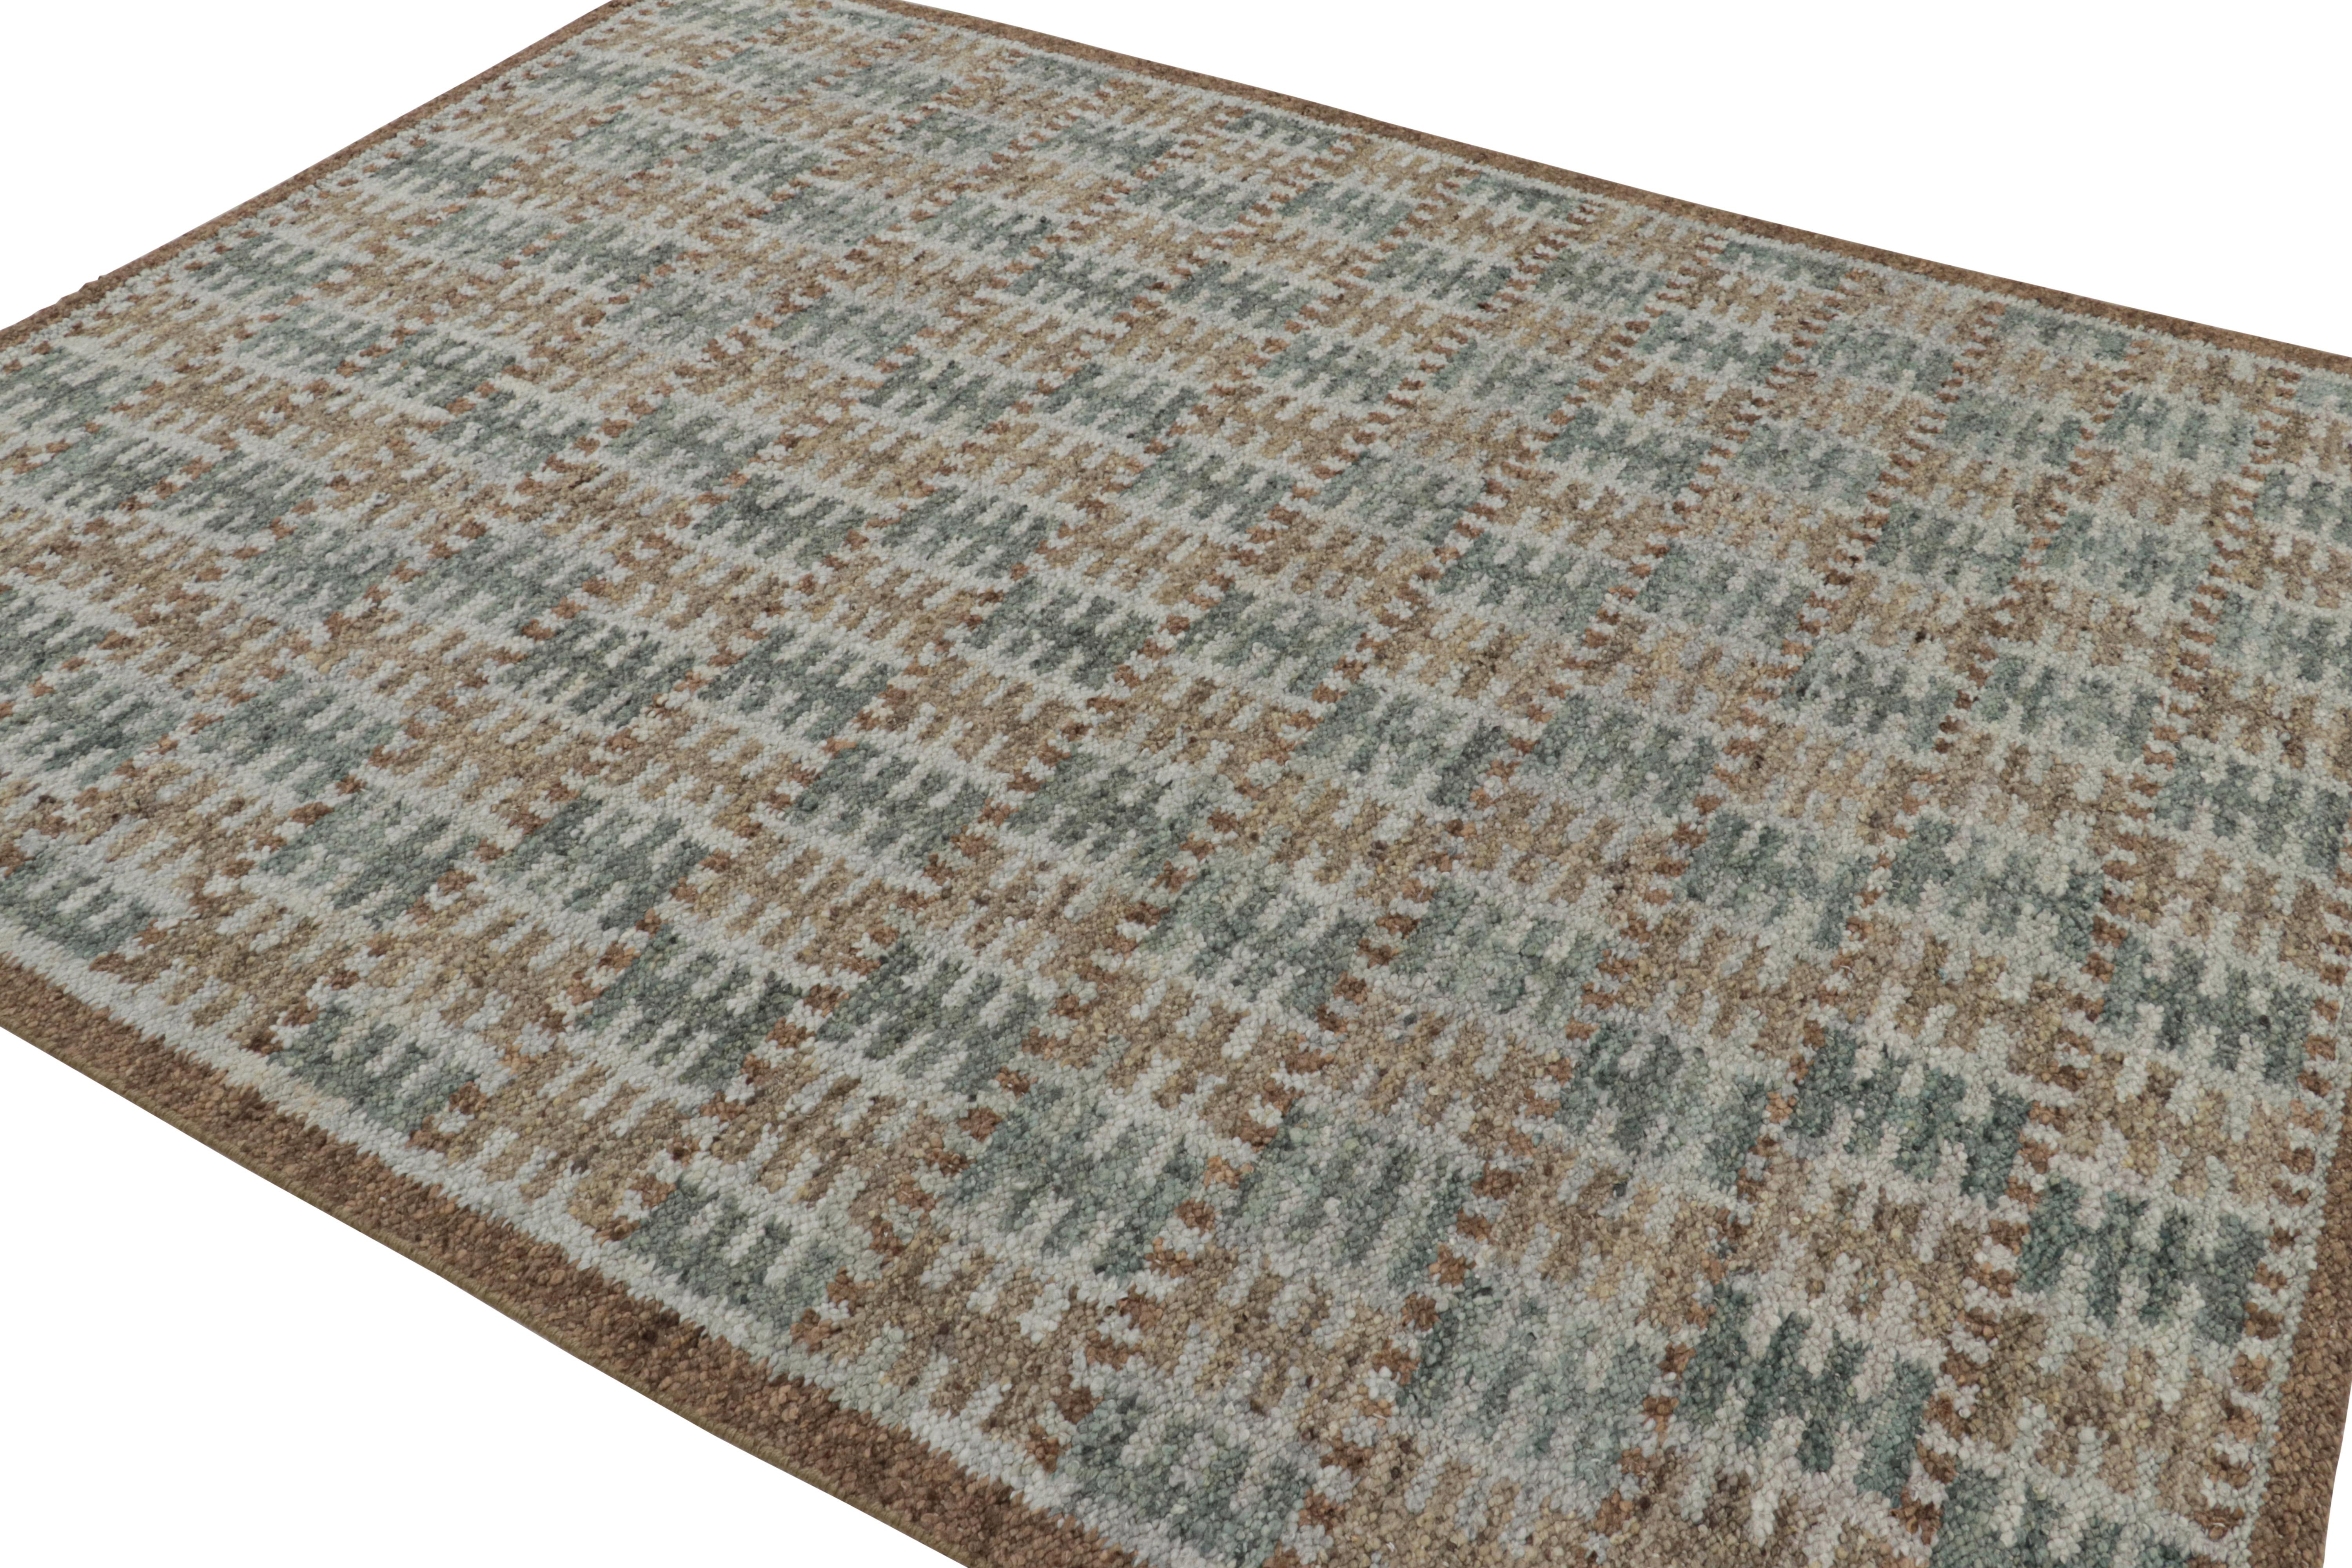 Indian Rug & Kilim’s Scandinavian Style Rug in Beige-Brown and Teal Geometric Patterns For Sale